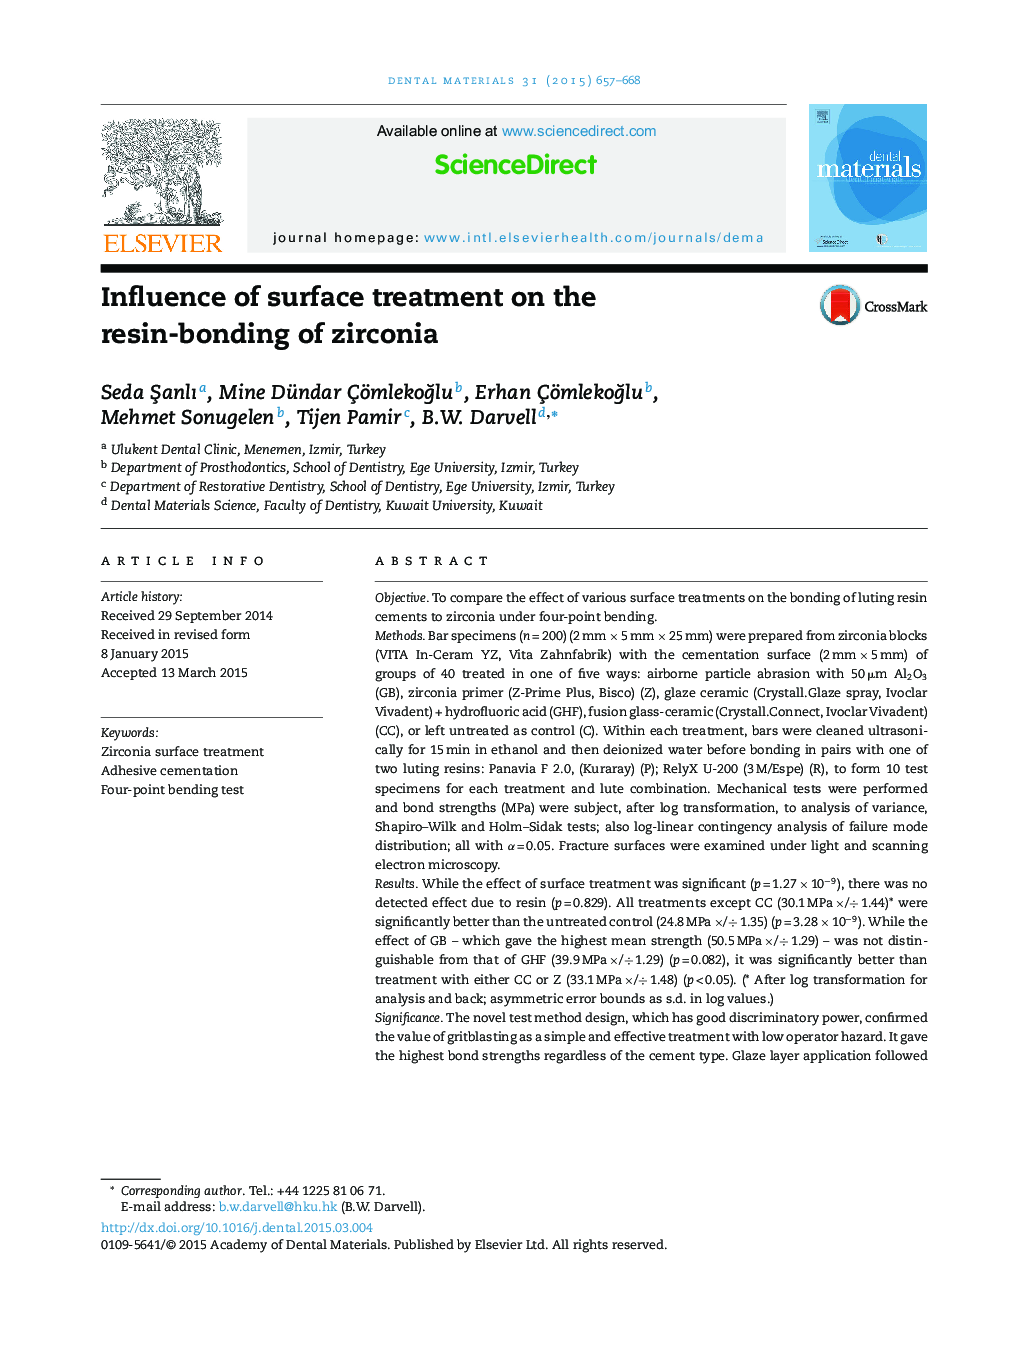 Influence of surface treatment on the resin-bonding of zirconia